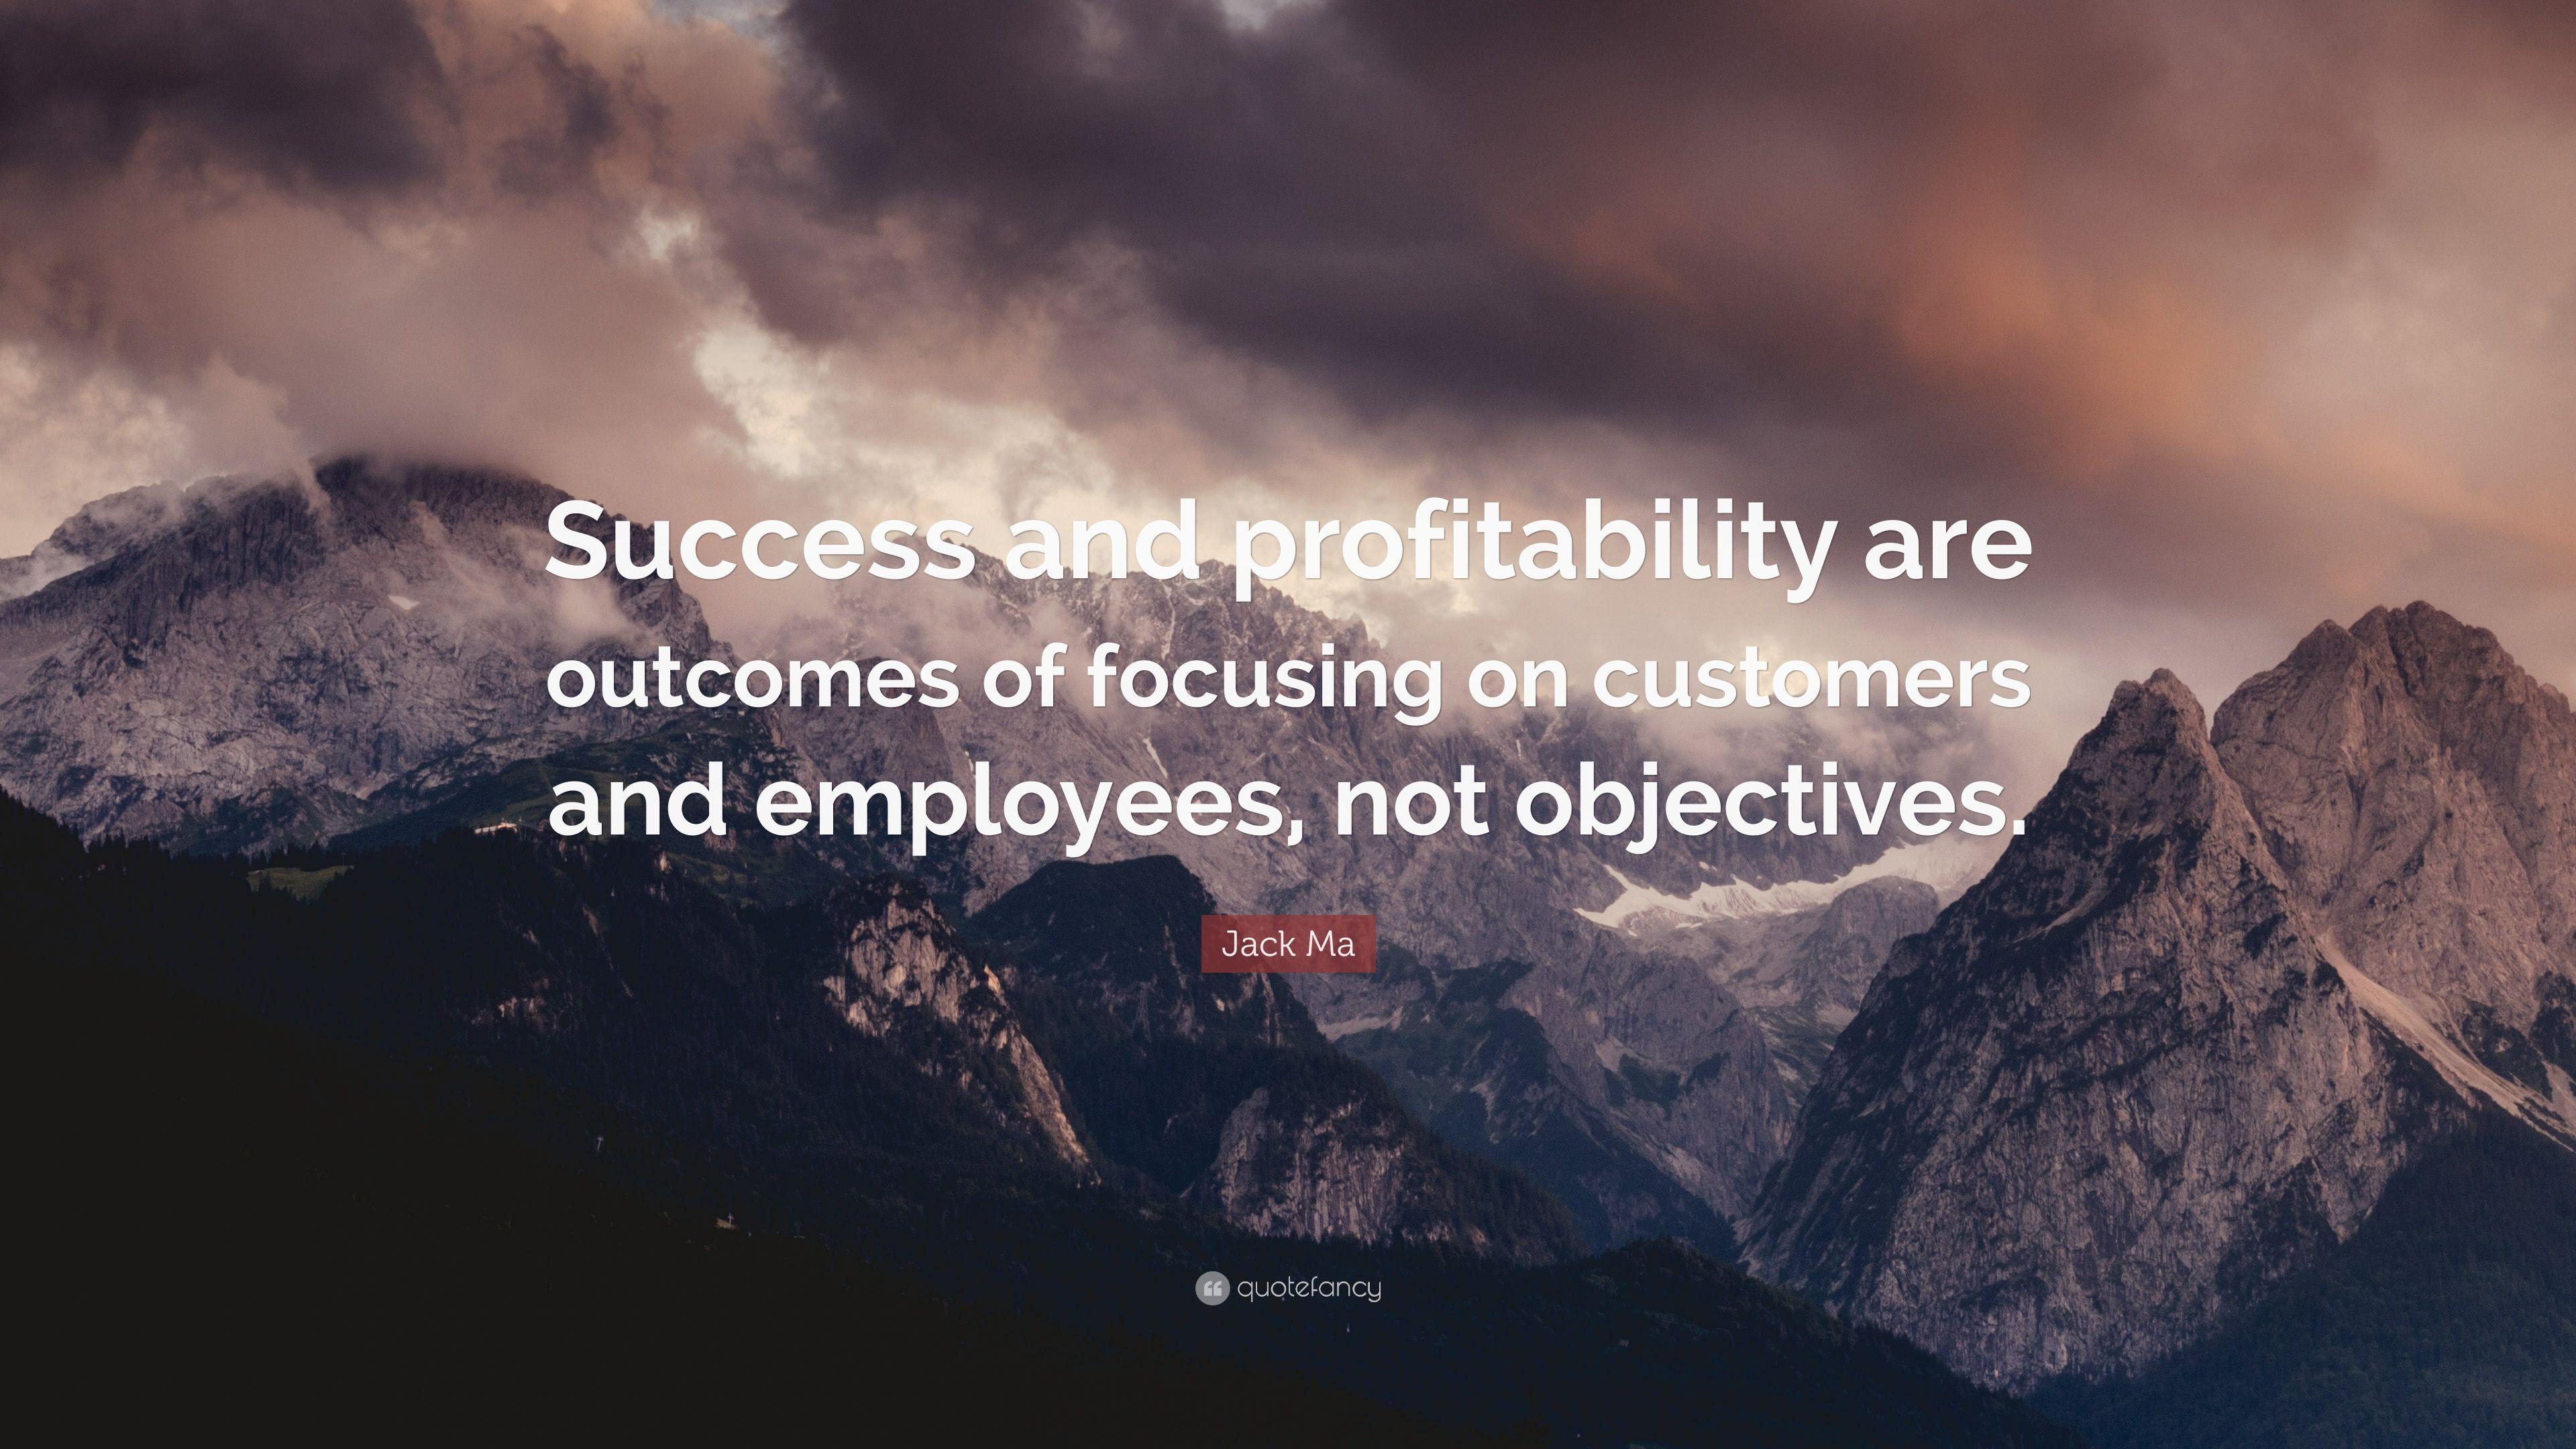 Jack Ma Quote: “Success and profitability are outcomes of focusing